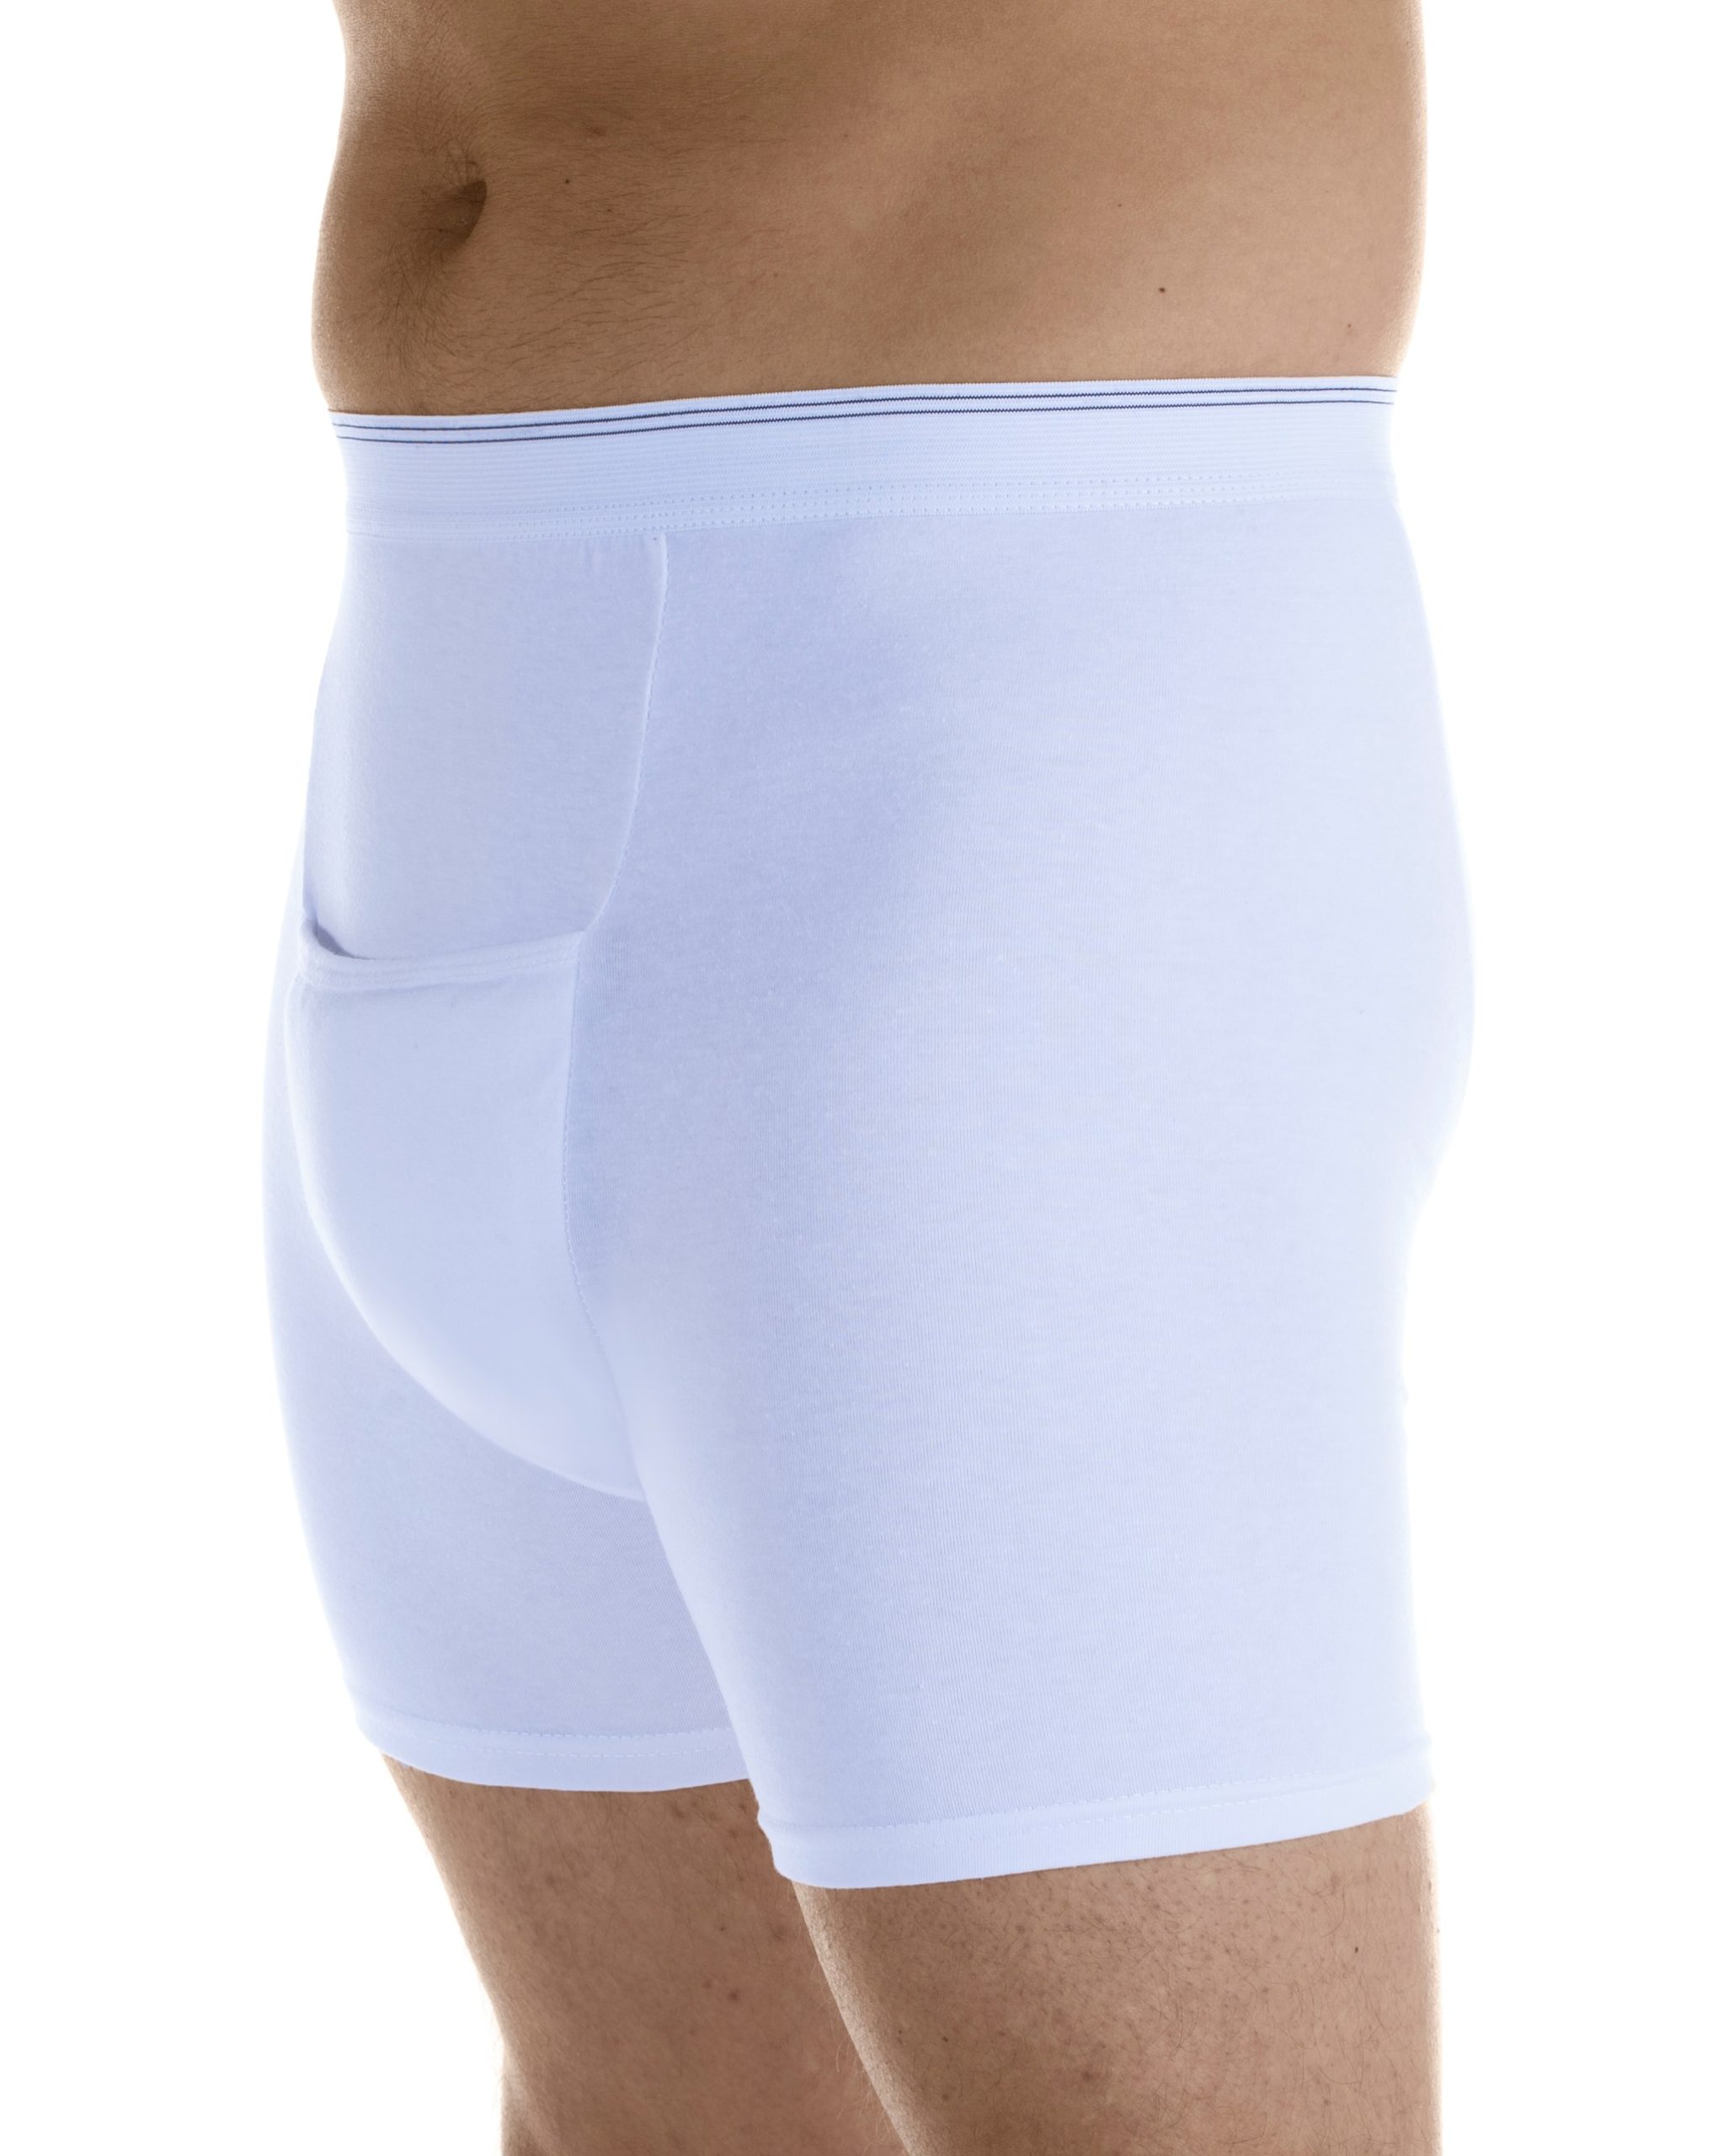 Maximum Absorbency H-Fly Boxer Brief - Wearever HDM500 - Wearever